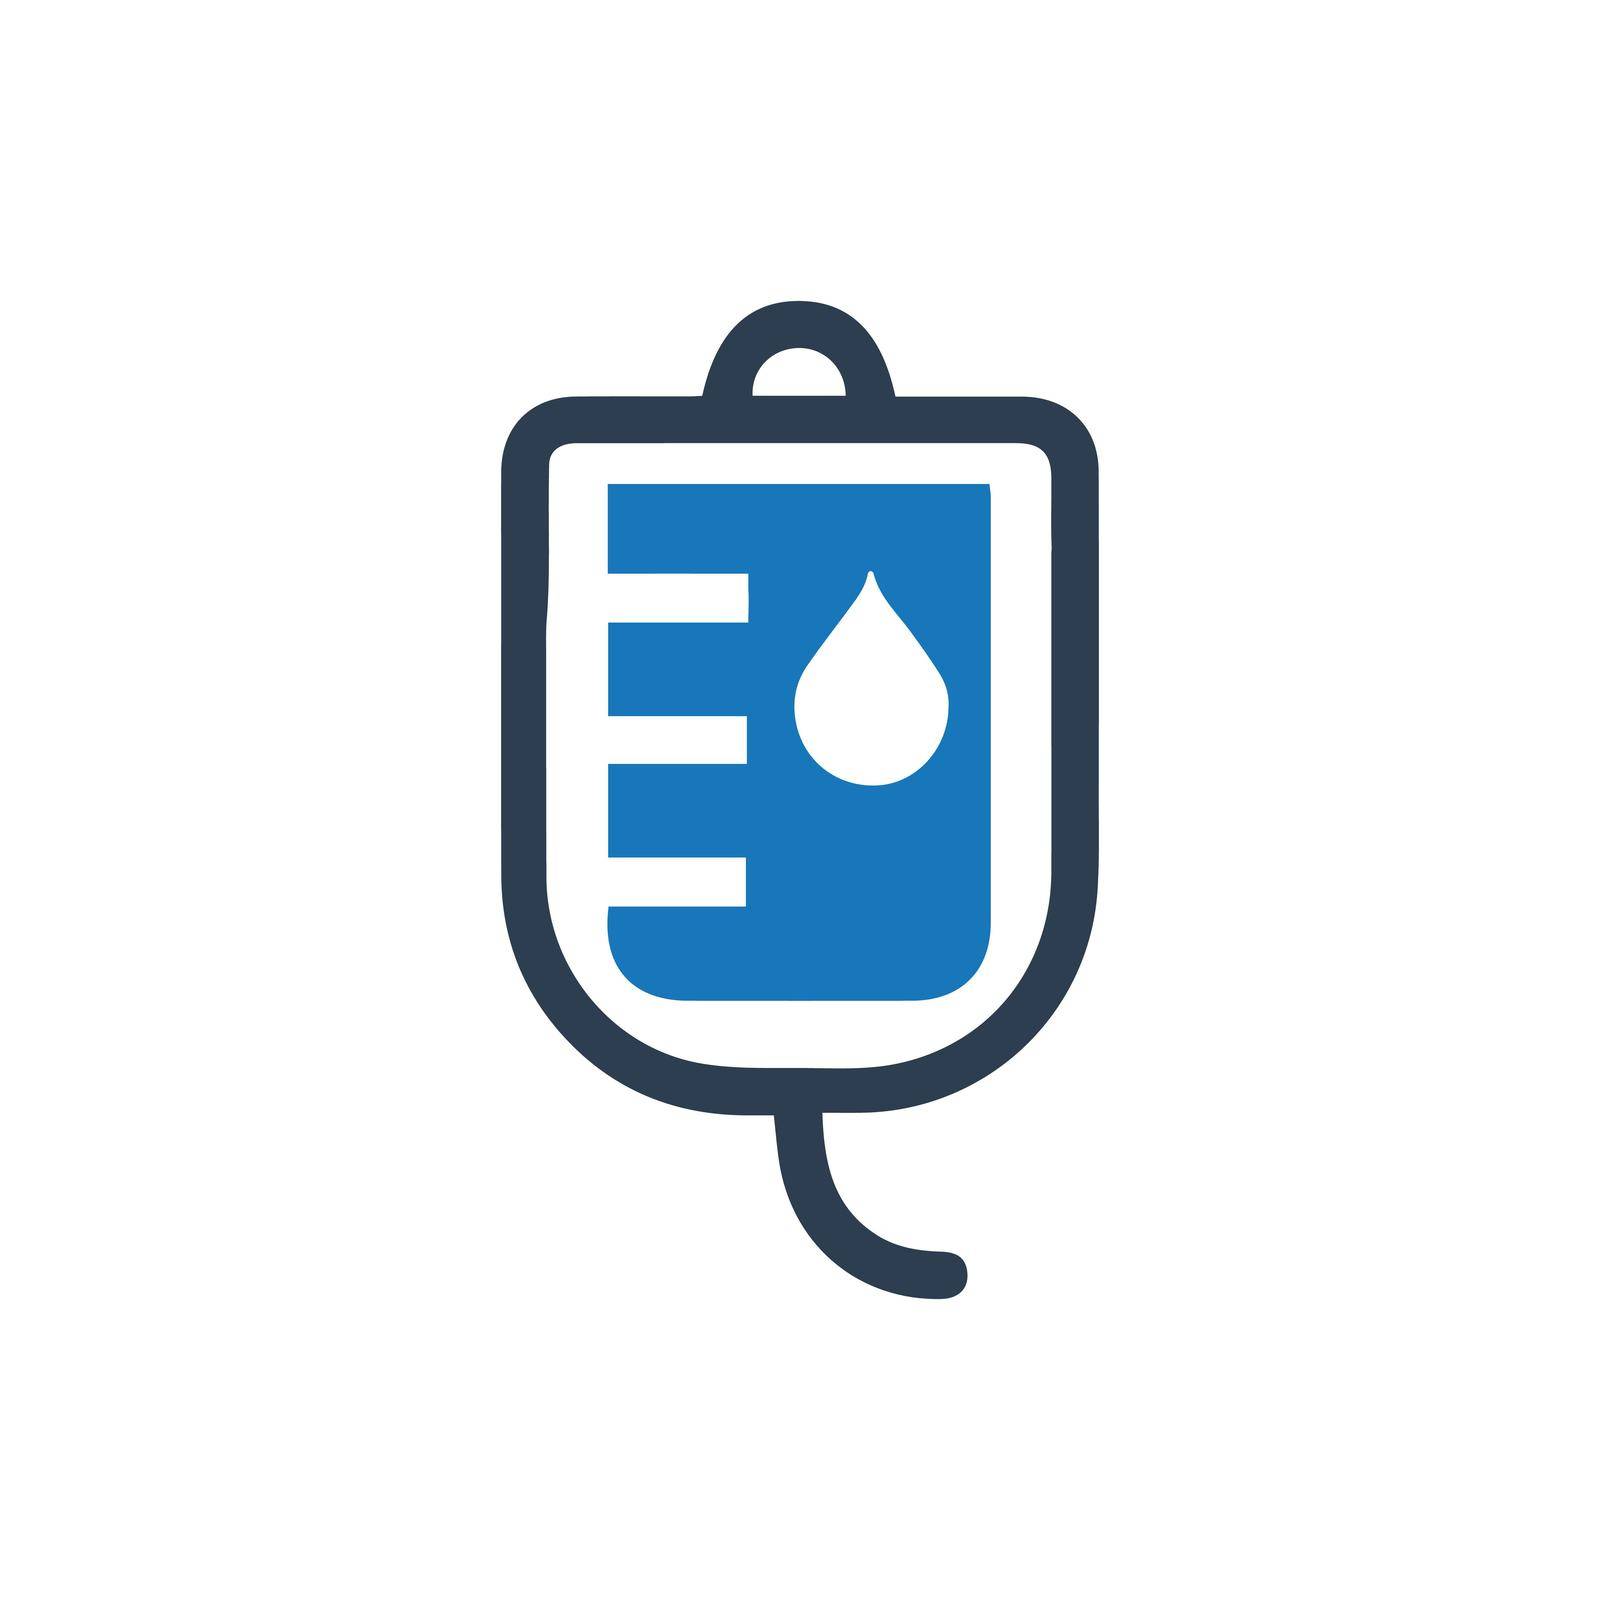 Blood Transfusion icon. Vector EPS file.